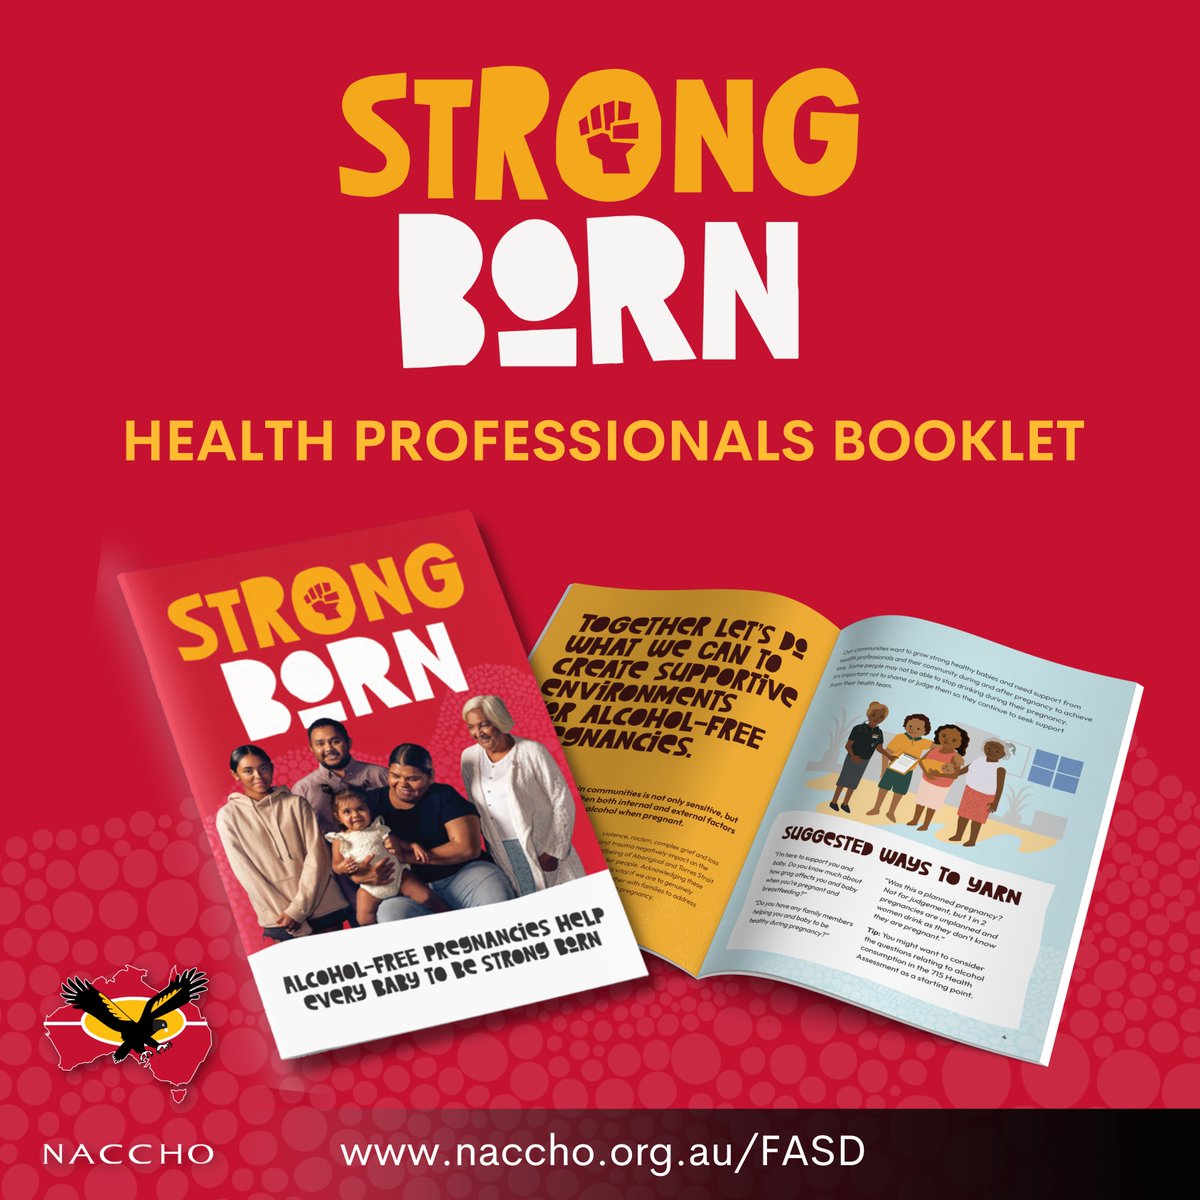 Alcohol-free pregnancies help every baby to be Strong Born.

The health professionals booklet raises awareness of FASD among ACCHO staff and health professionals.

More info & resources: naccho.org.au/FASD

#StrongBorn #FASDawareness #AlcoholHarms #Pregnancy